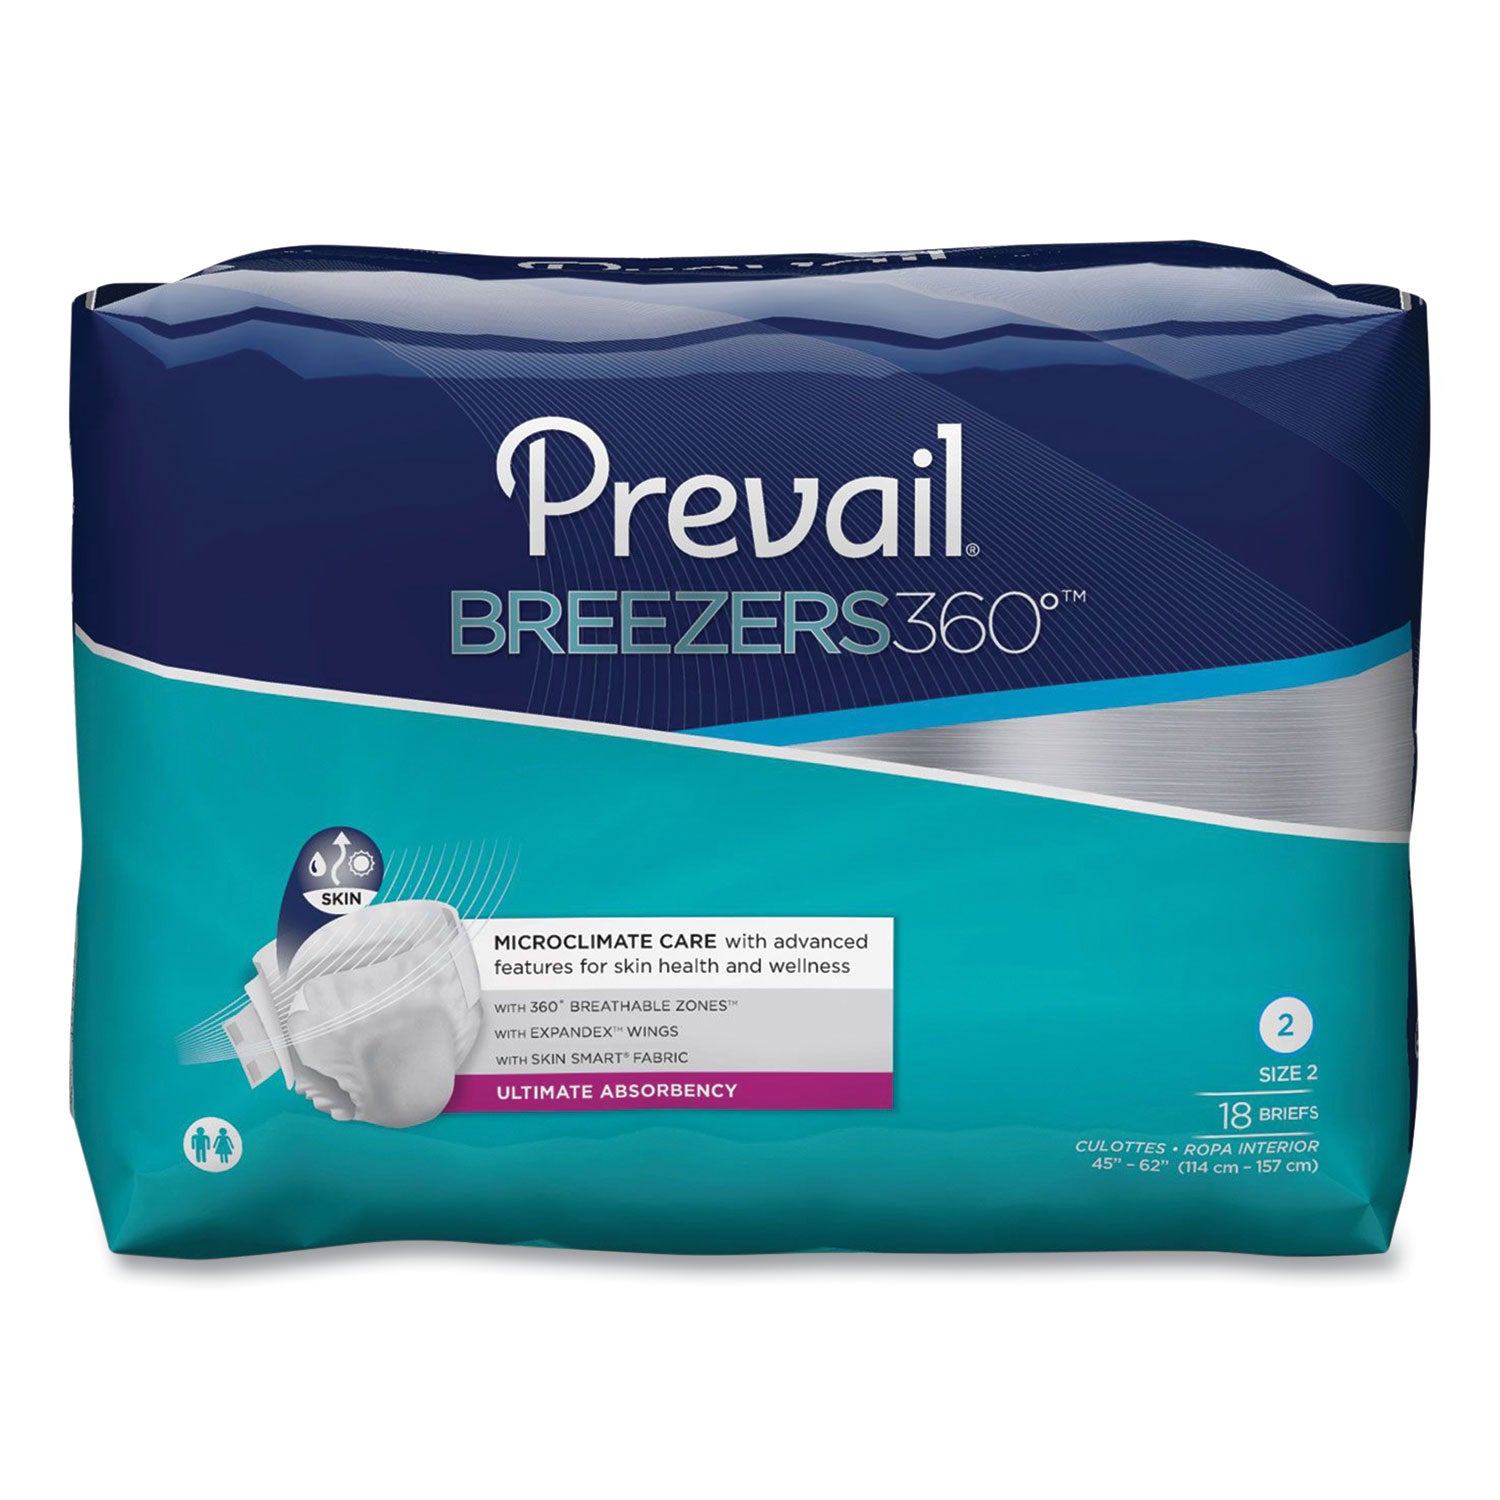 breezers360-degree-briefs-ultimate-absorbency-size-2-45-to-62-waist-72-carton_pvlpvbng013 - 1